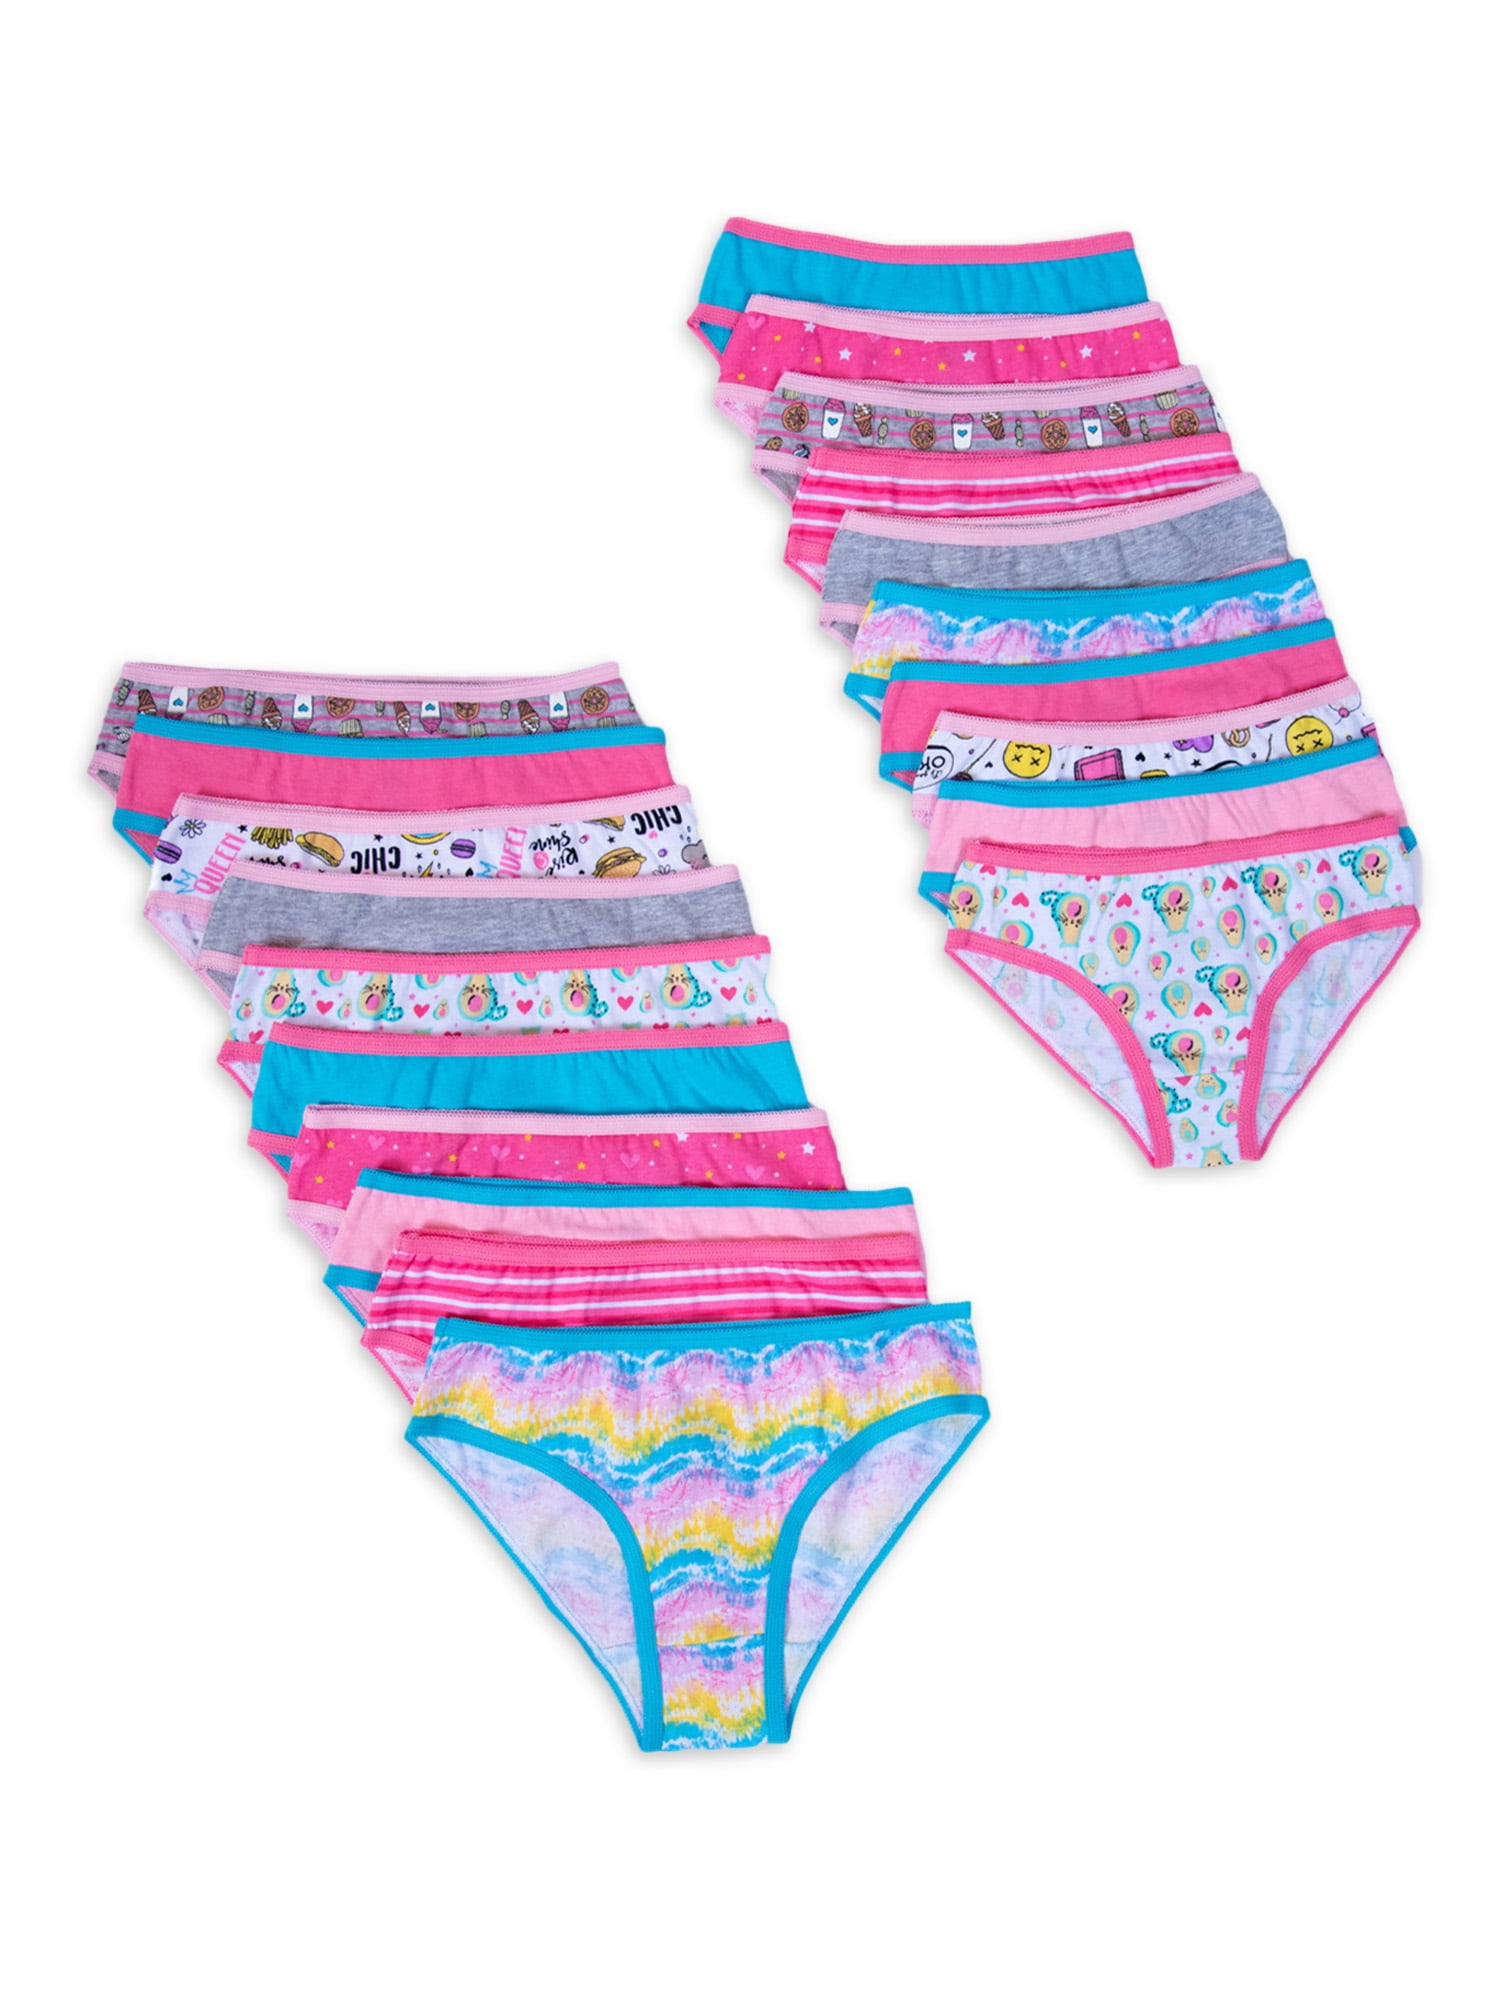 24 Wholesale Girl's Underwear 5-Packs By 1000% Cute - Sizes 4-12/14 -  Assorted Styles - at 